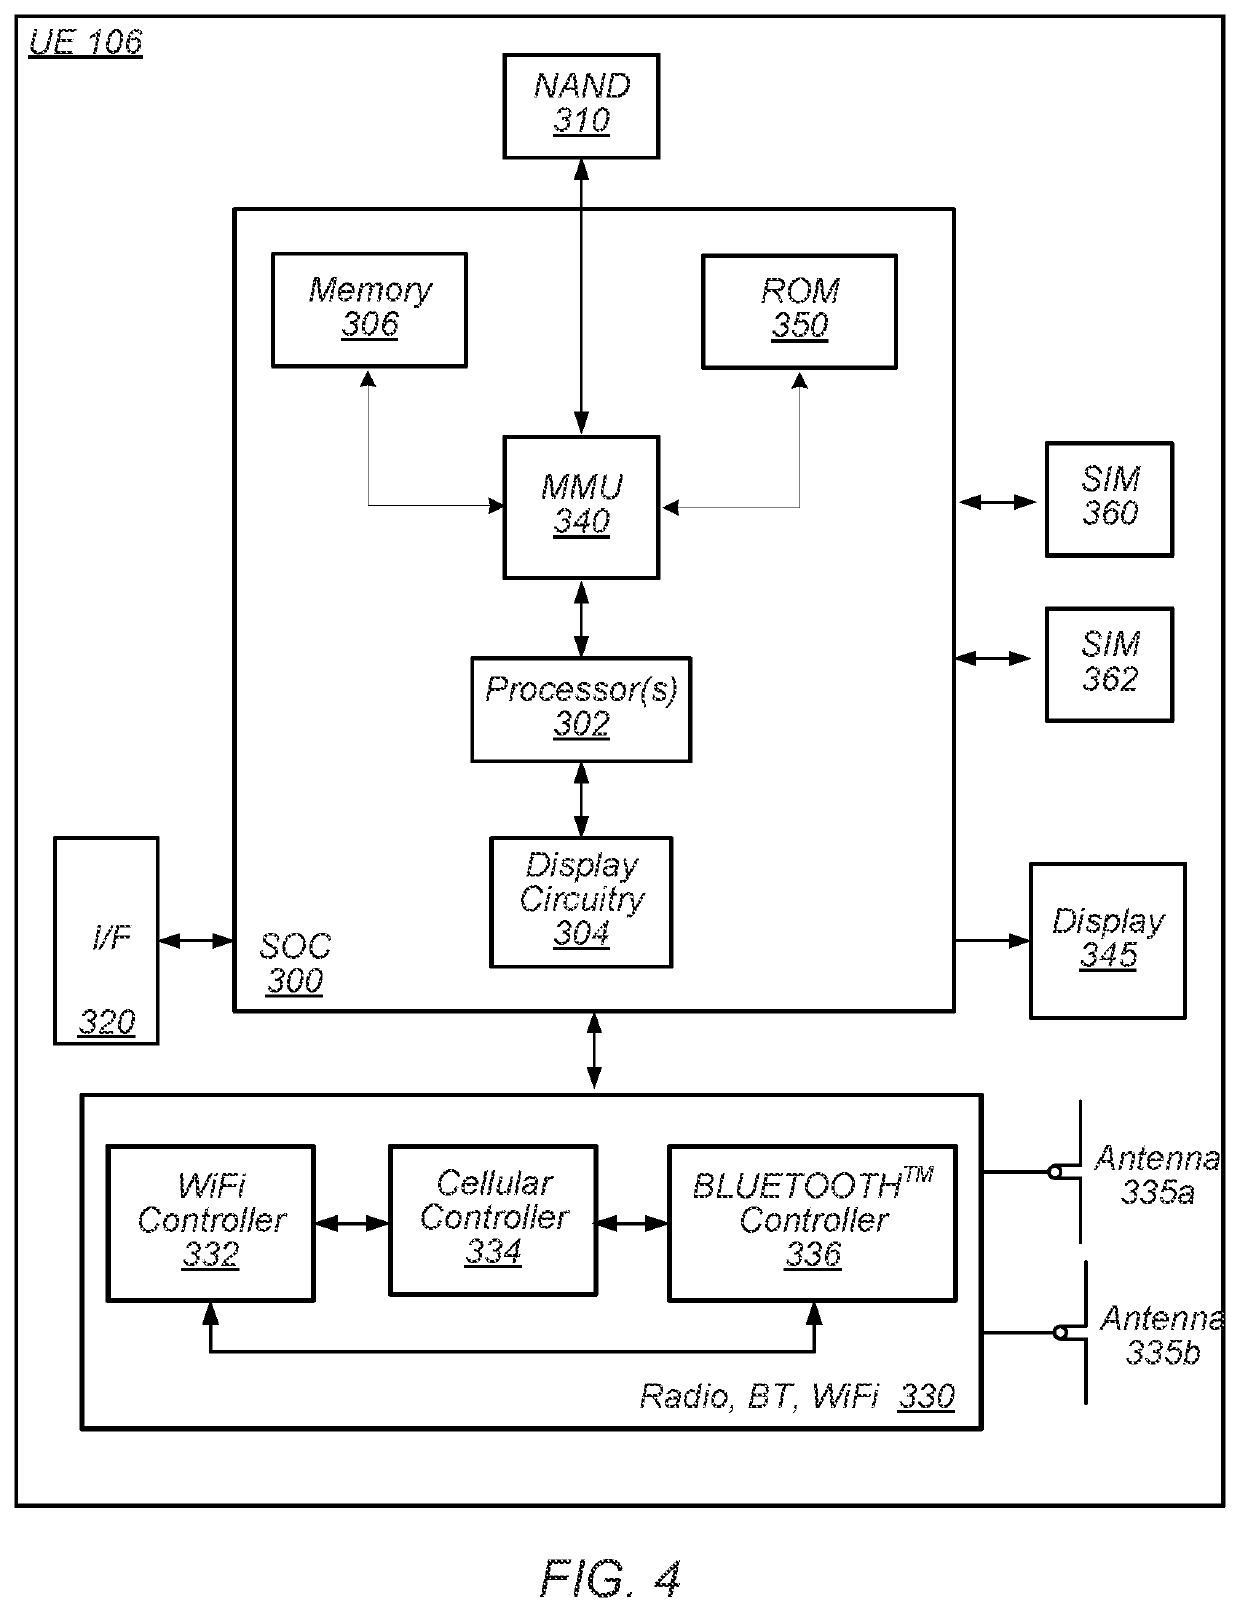 Multi-SIM UE Capability Indications and Band Conflict Resolution